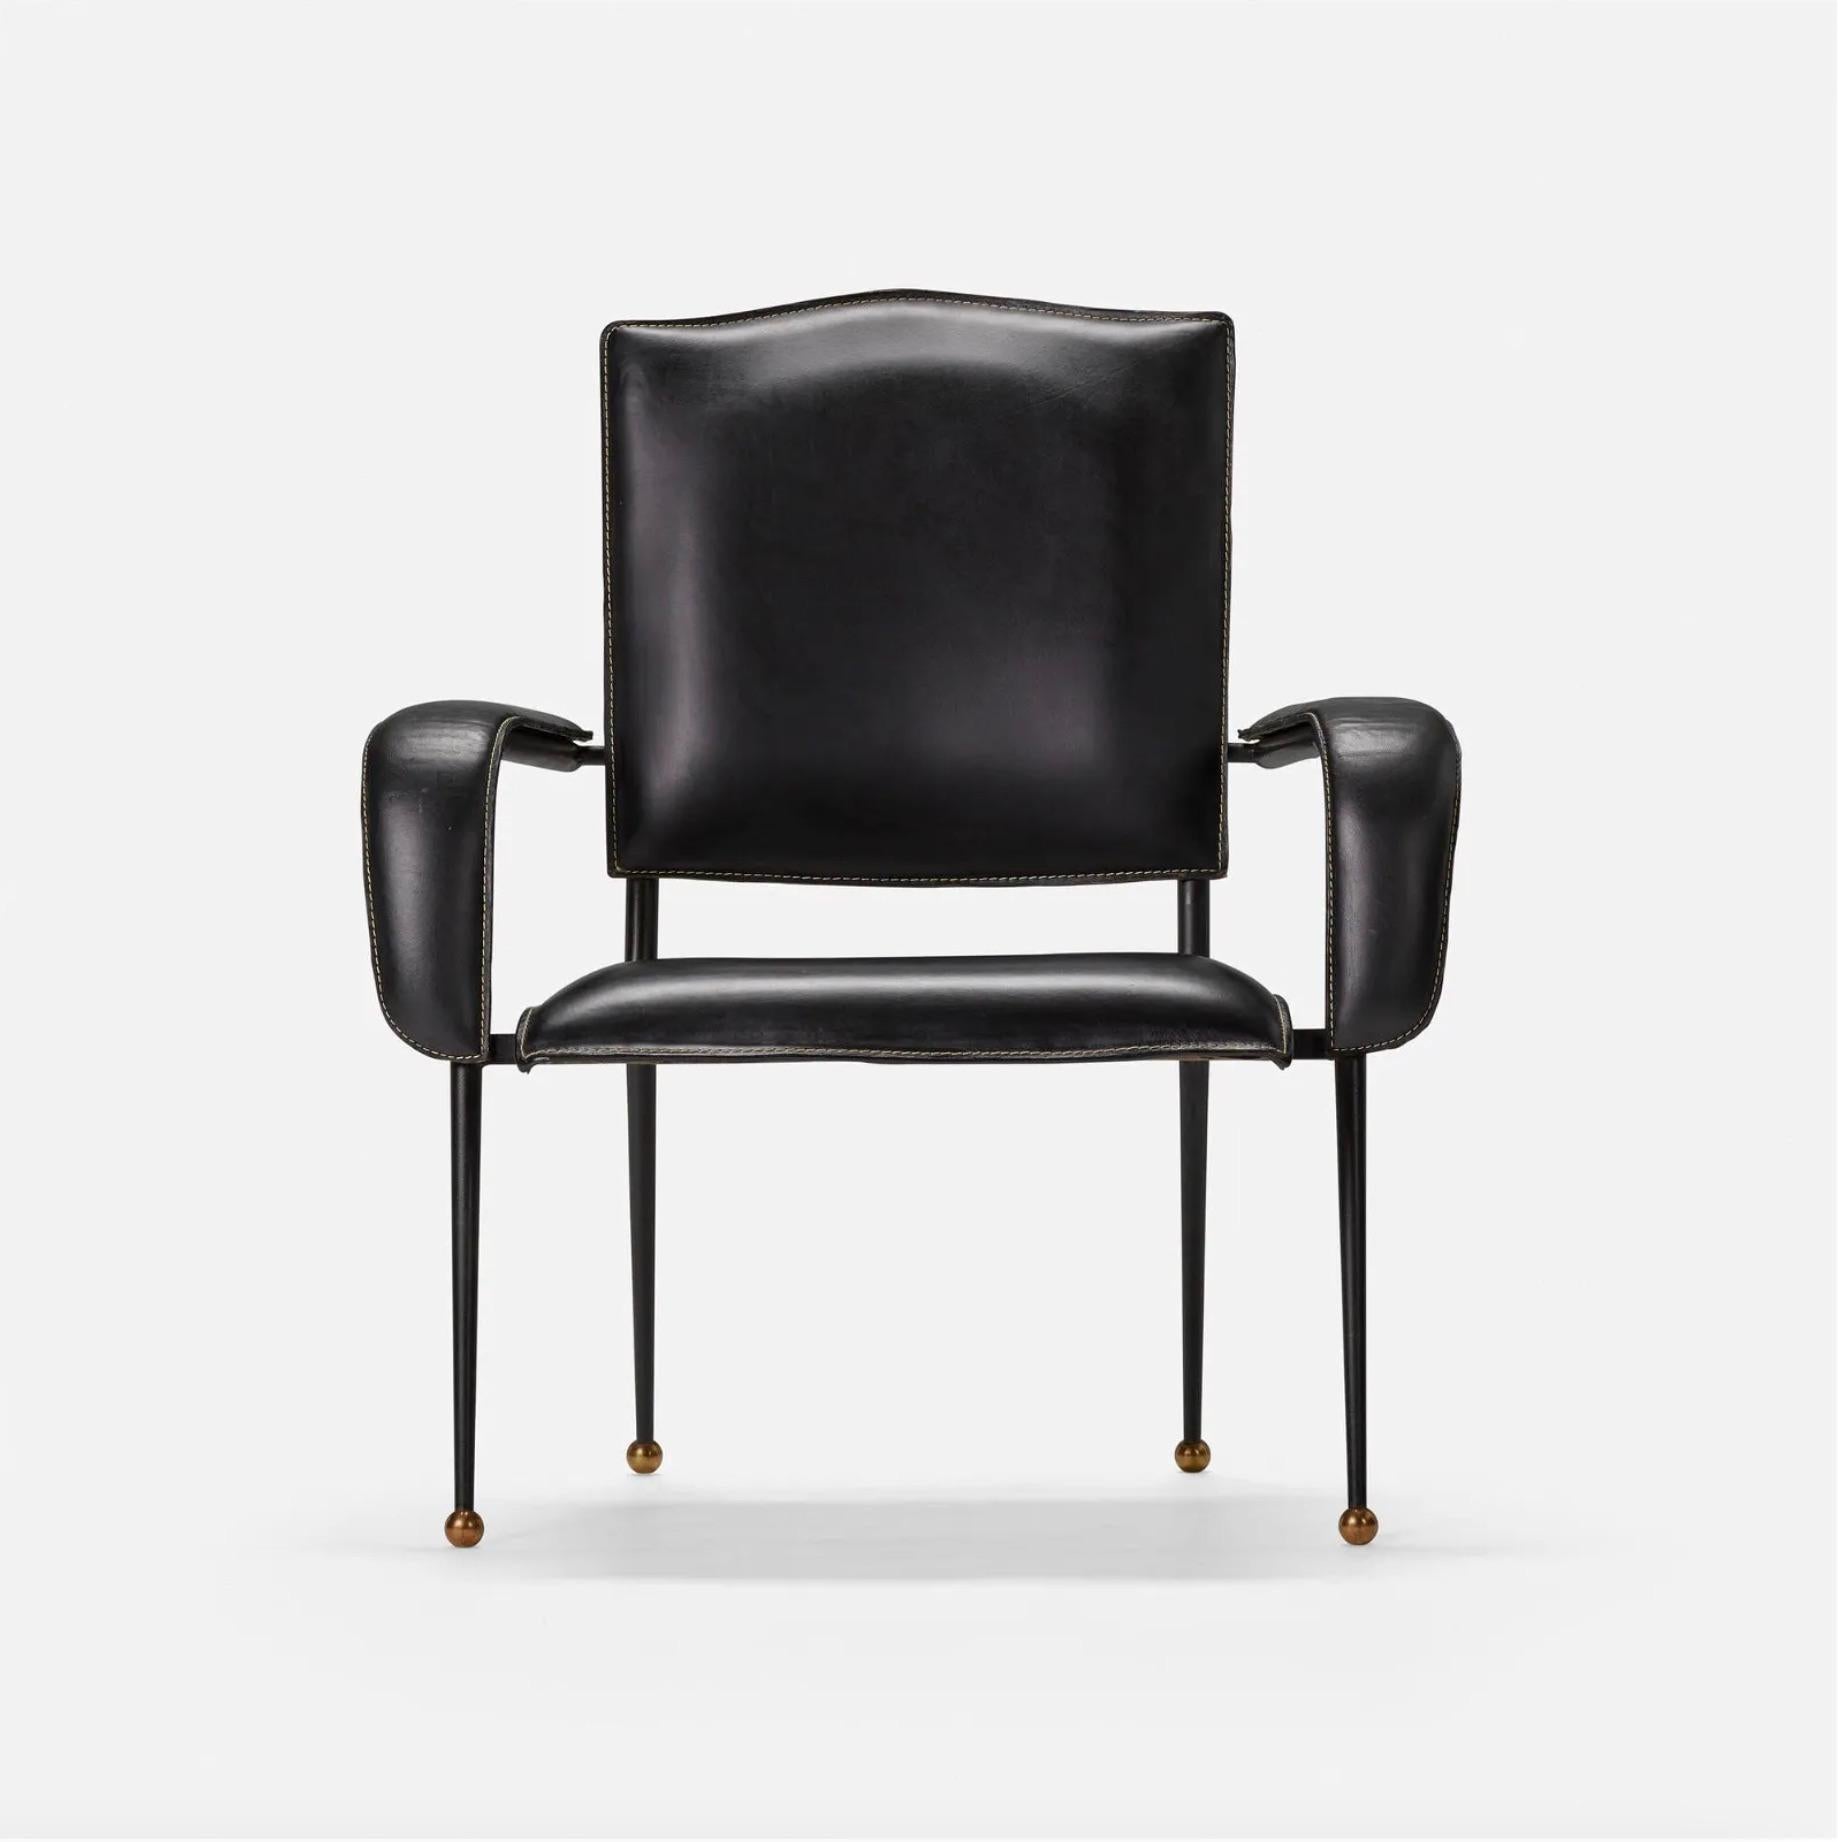 Stunning leather armchair by French designer Jacques Adnet. Black iron frame sitting atop brass ball feet. Black leather seat, seat back and arm rests with signature Adnet contrast stitch at the seams. Good original condition. Extremely comfortable.